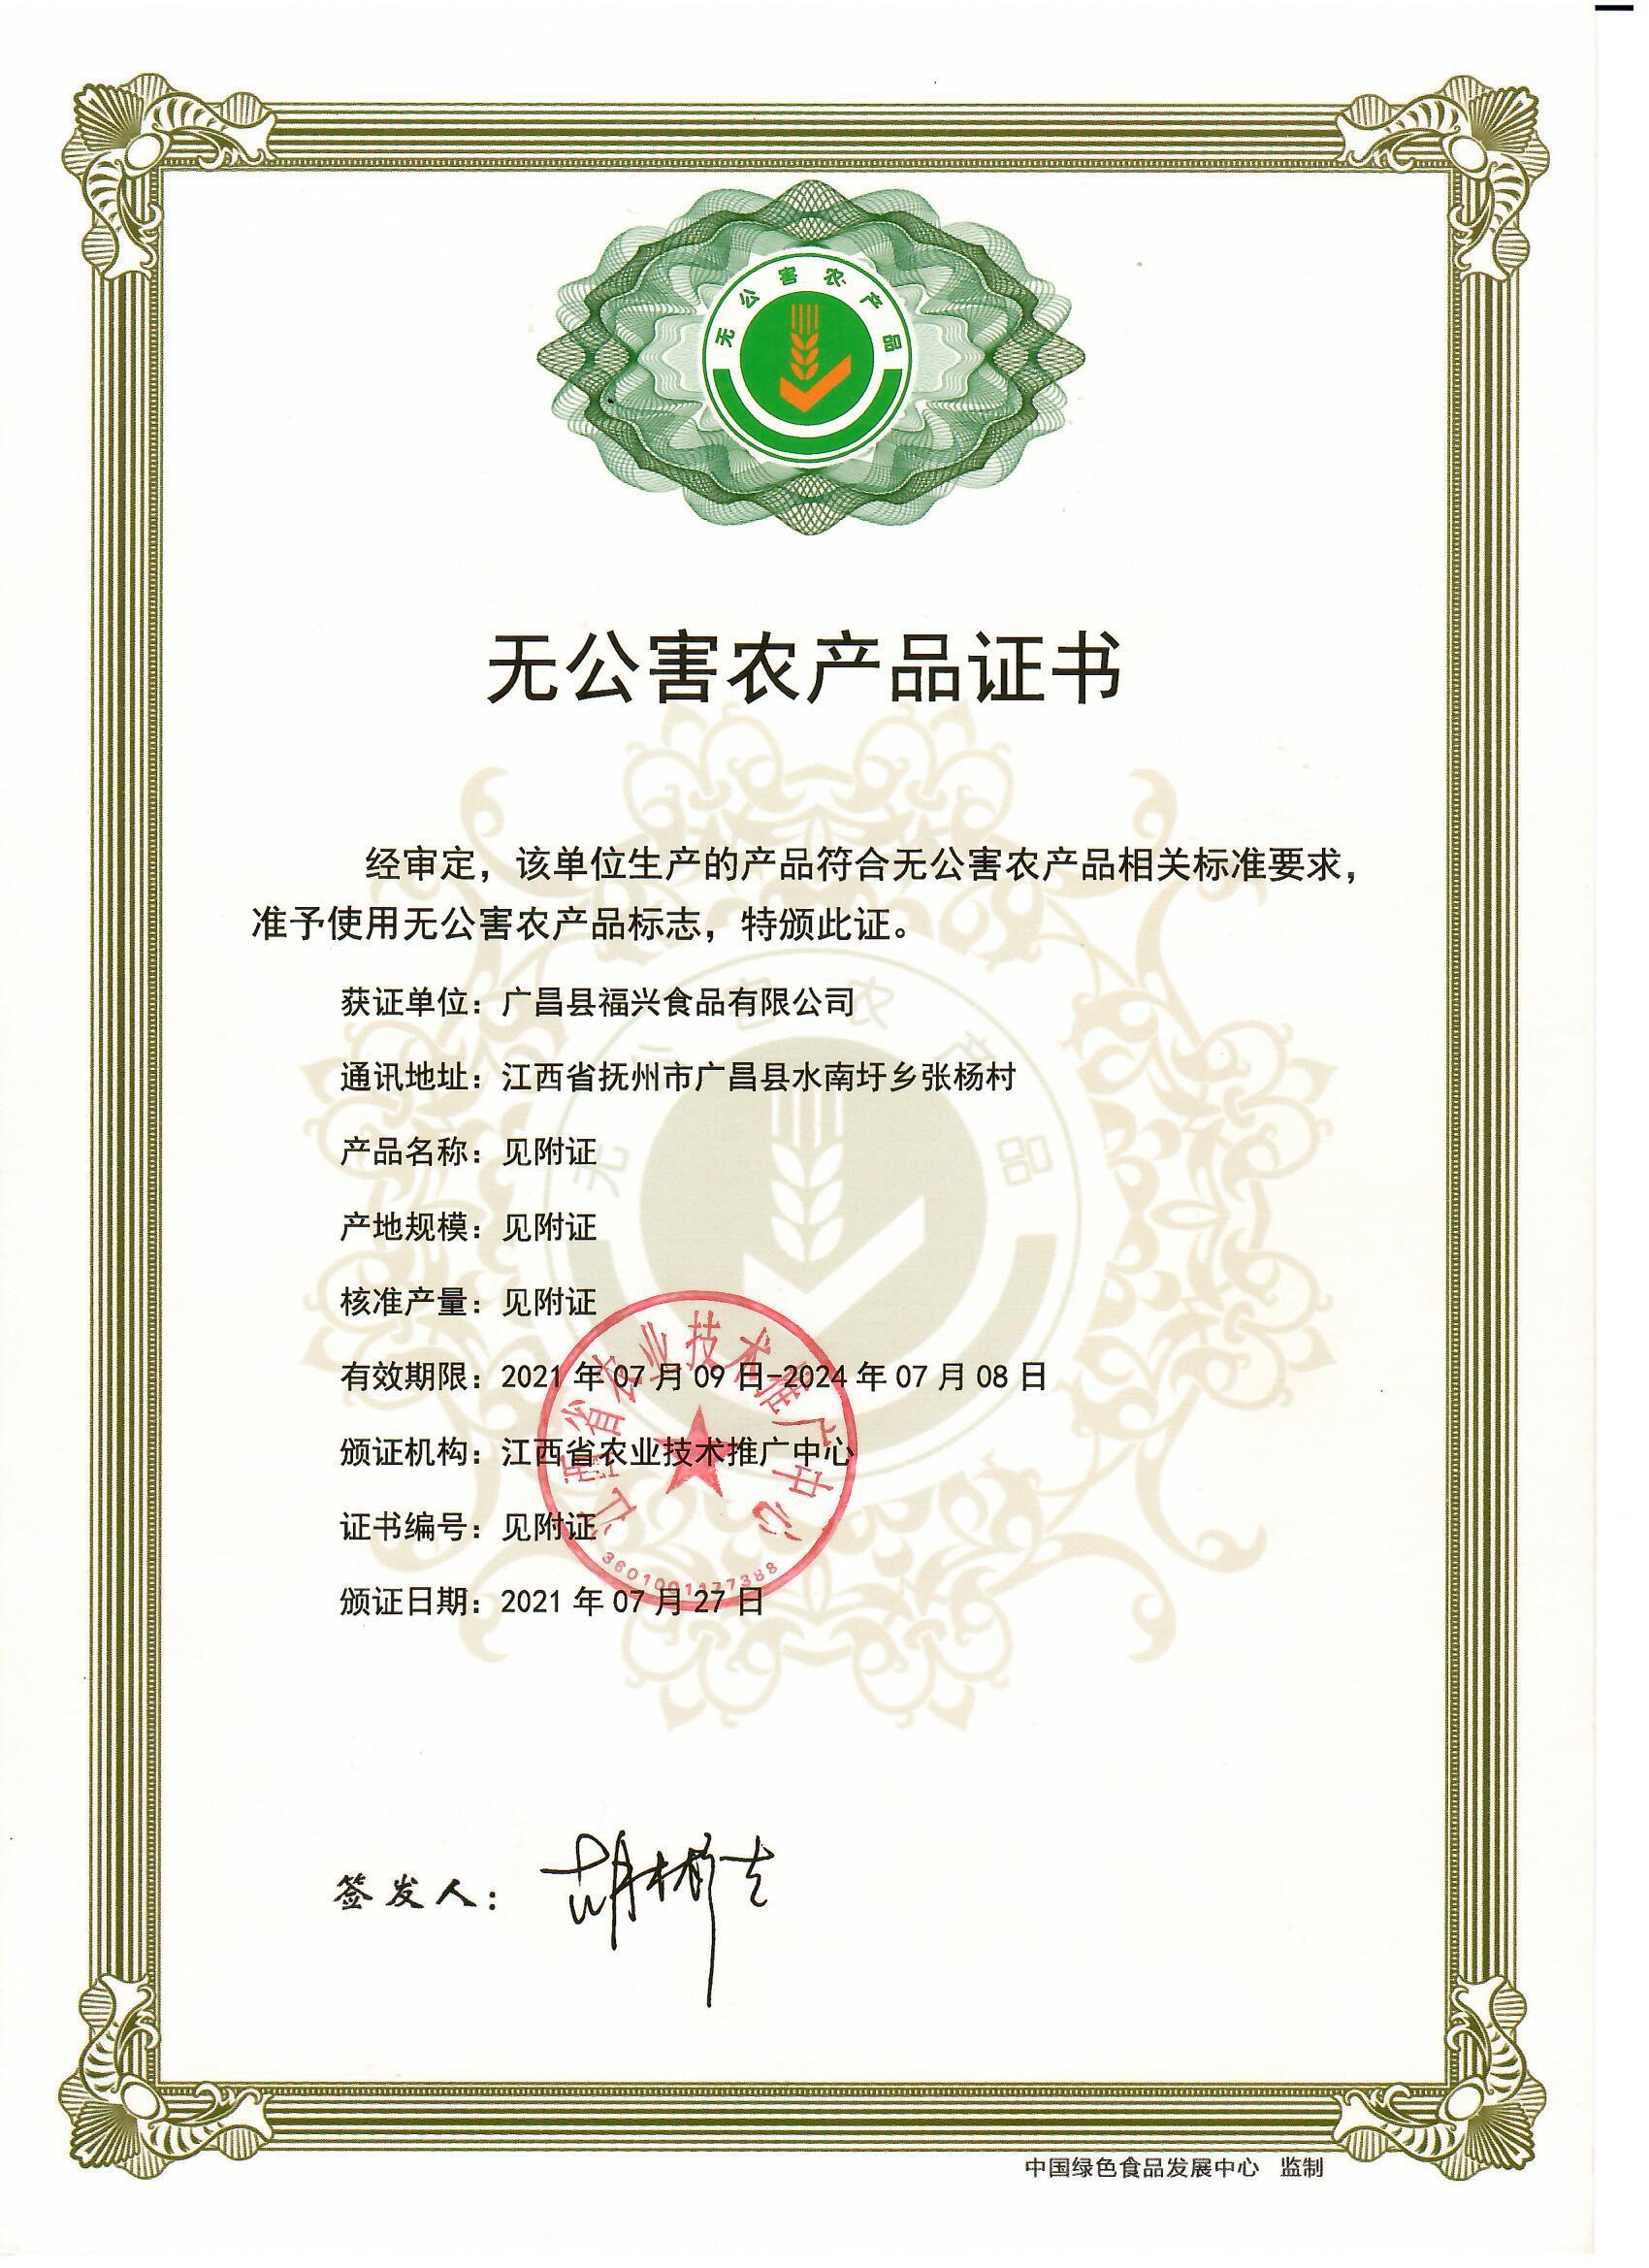 Pollution-free agricultural product certificate